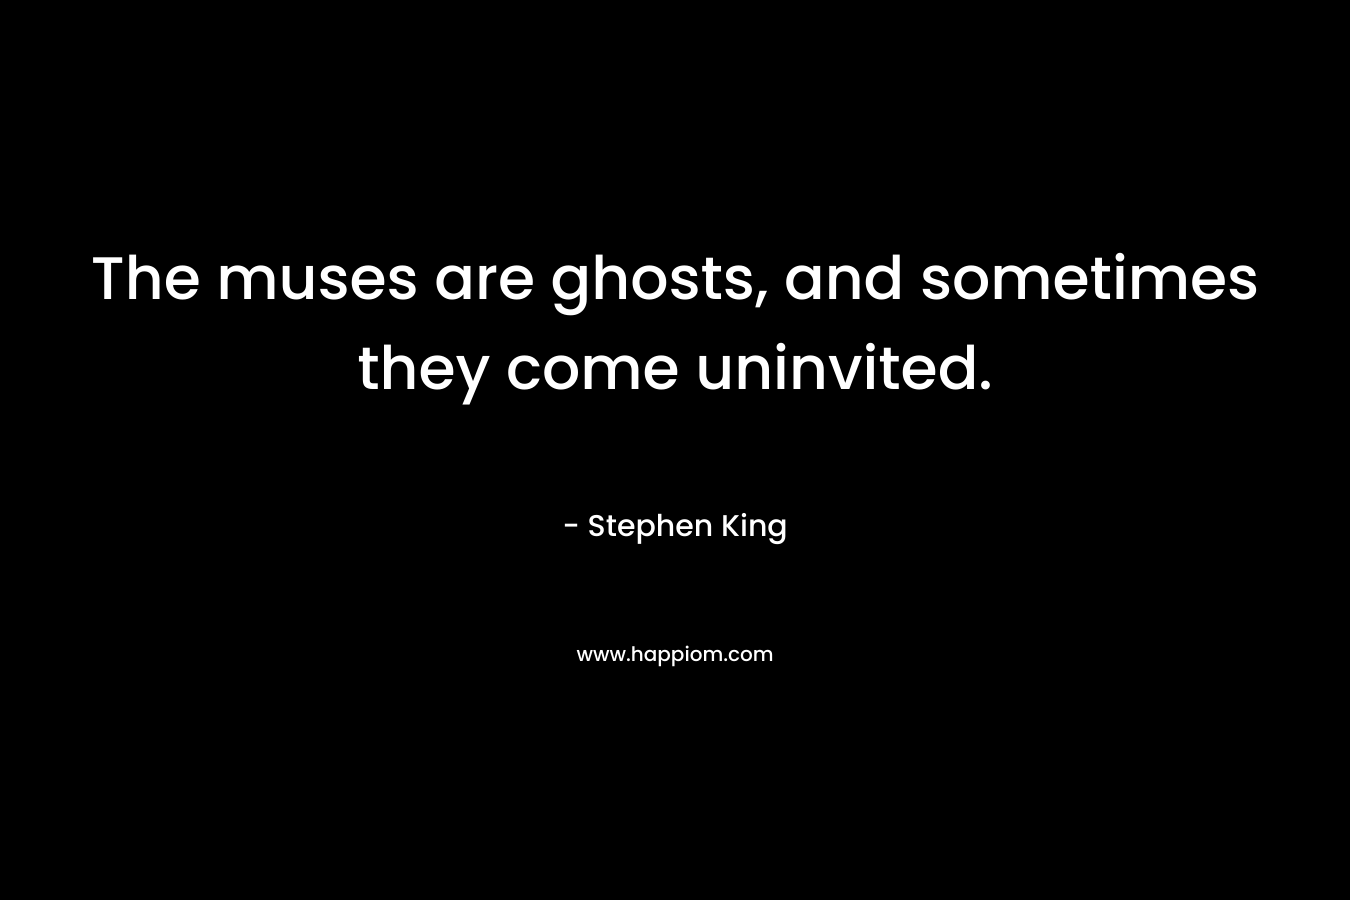 The muses are ghosts, and sometimes they come uninvited. – Stephen King